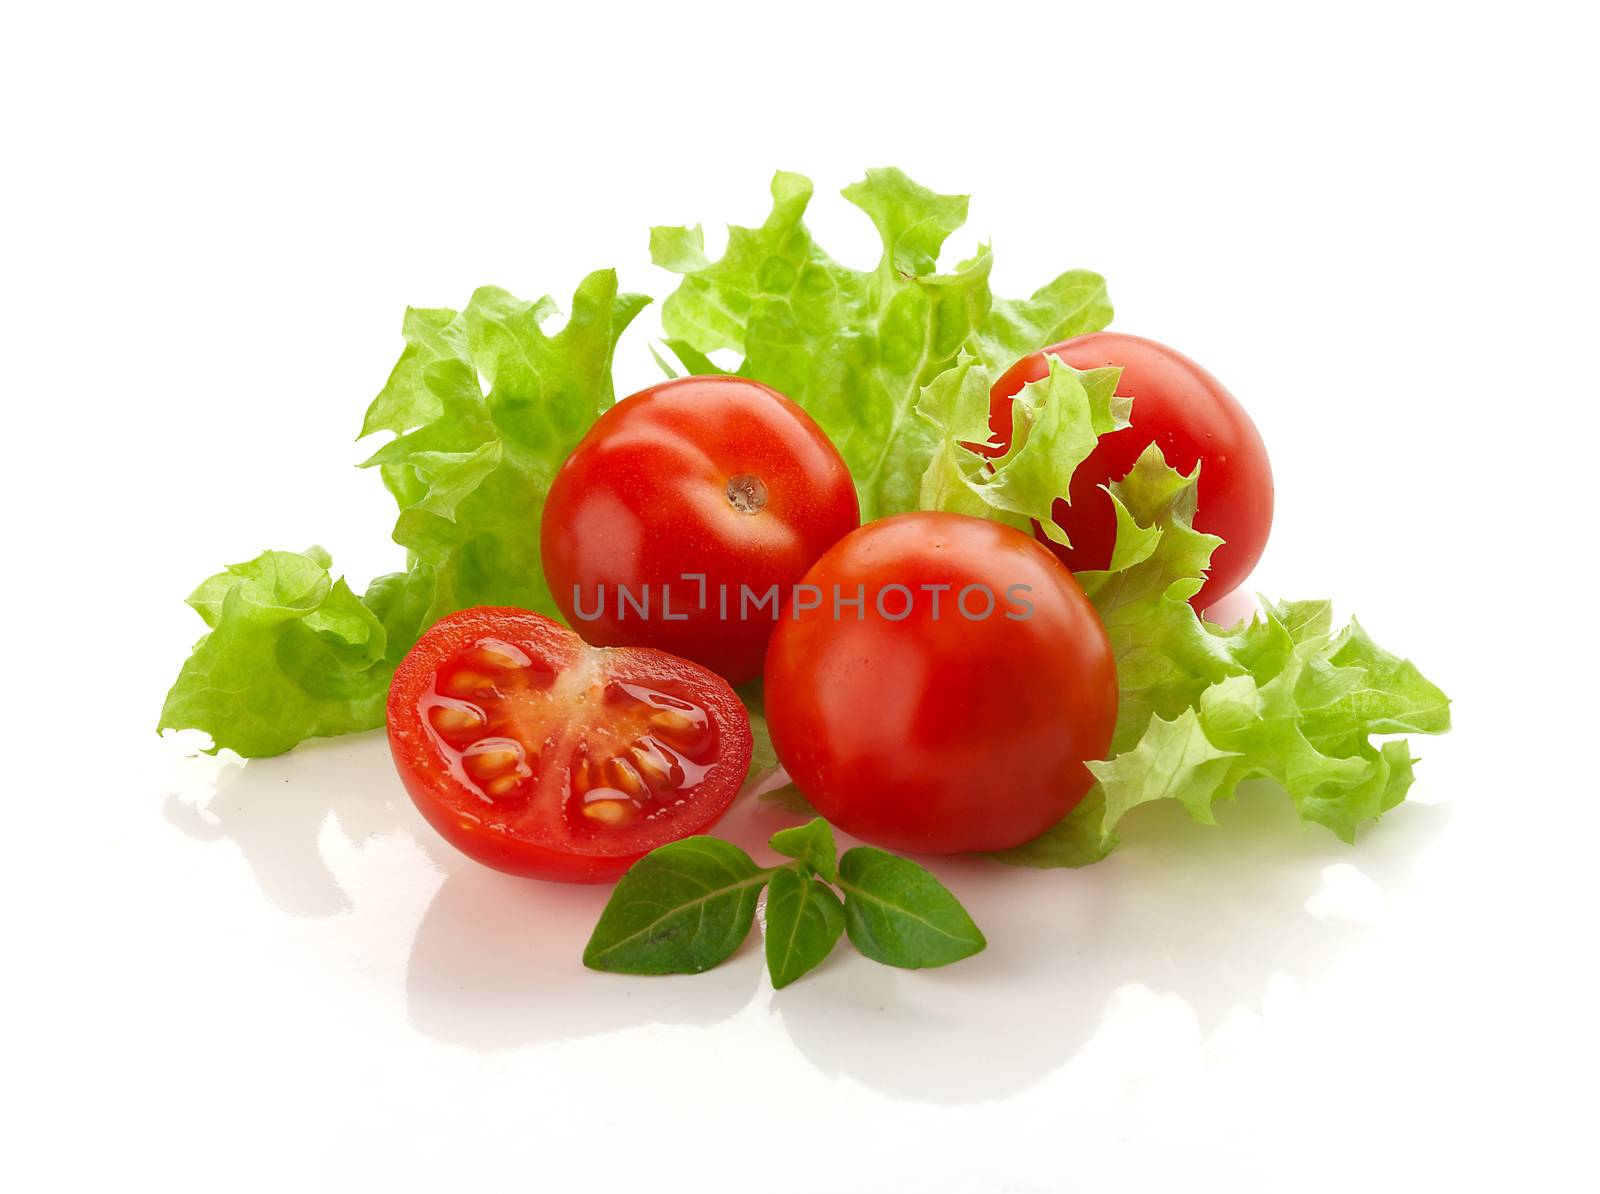 Some fresh red cherry tomatoes with green lettuce